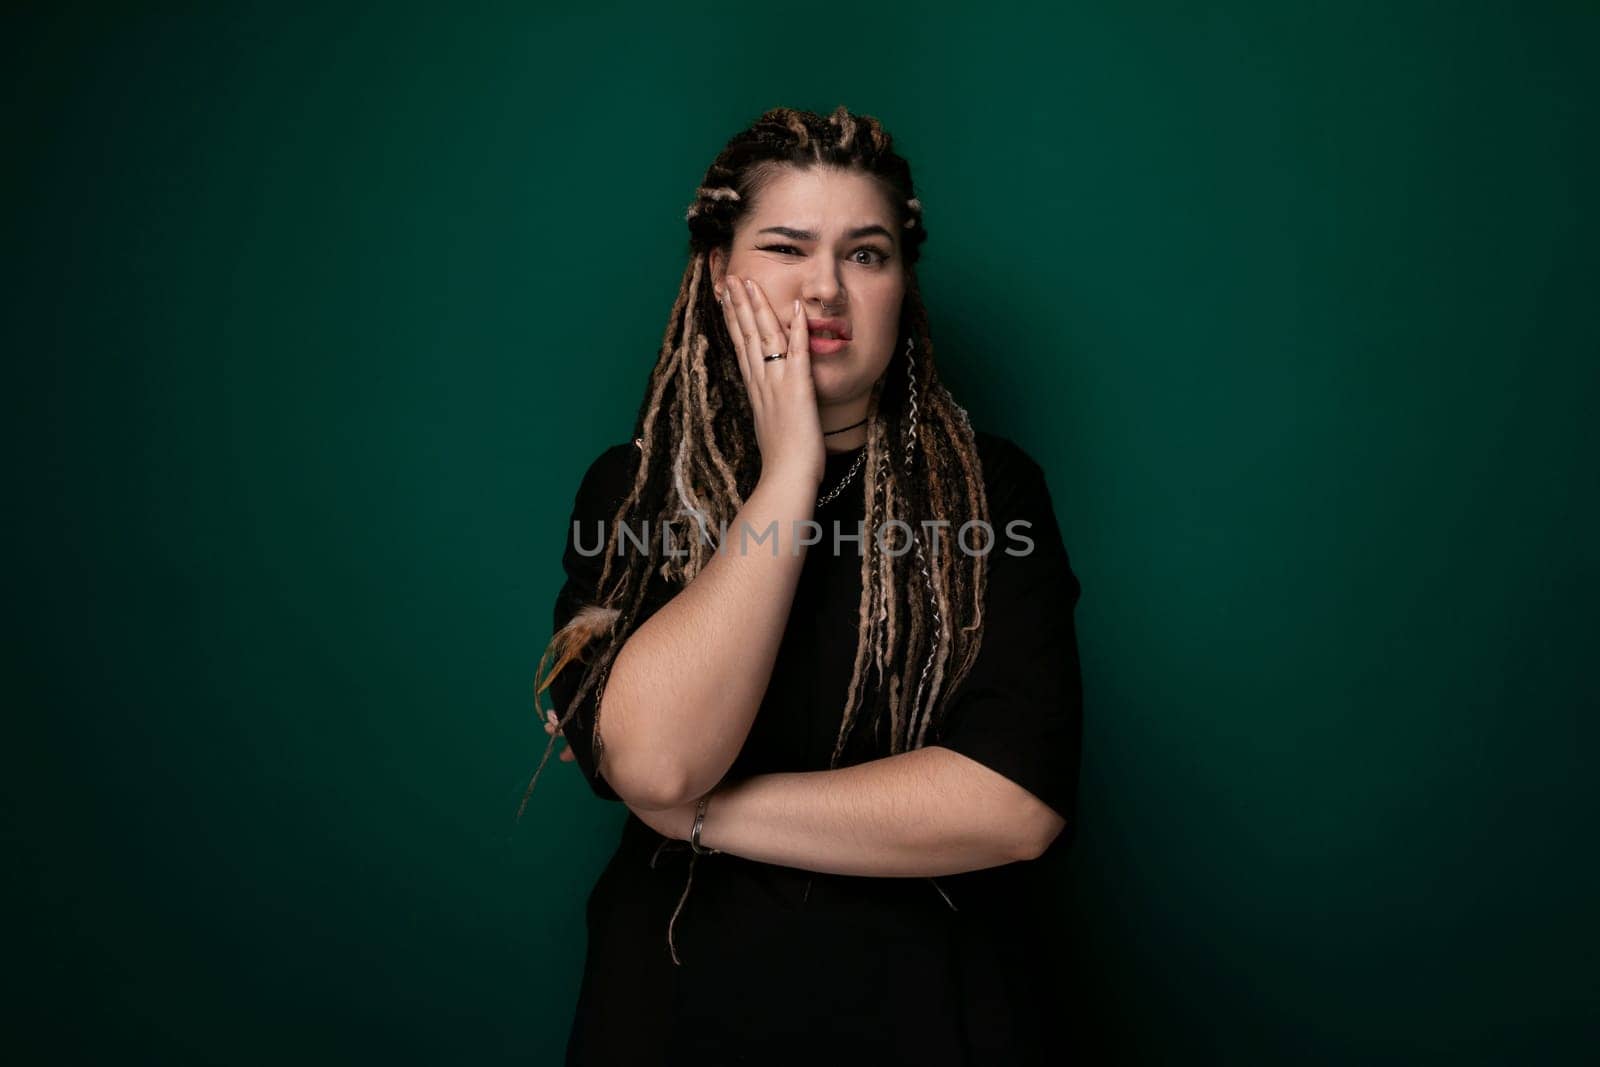 A woman with long dreadlocks covering her mouth, creating a secretive and mysterious appearance. Her face is partially hidden by the tangled hair, adding an element of intrigue to the image.